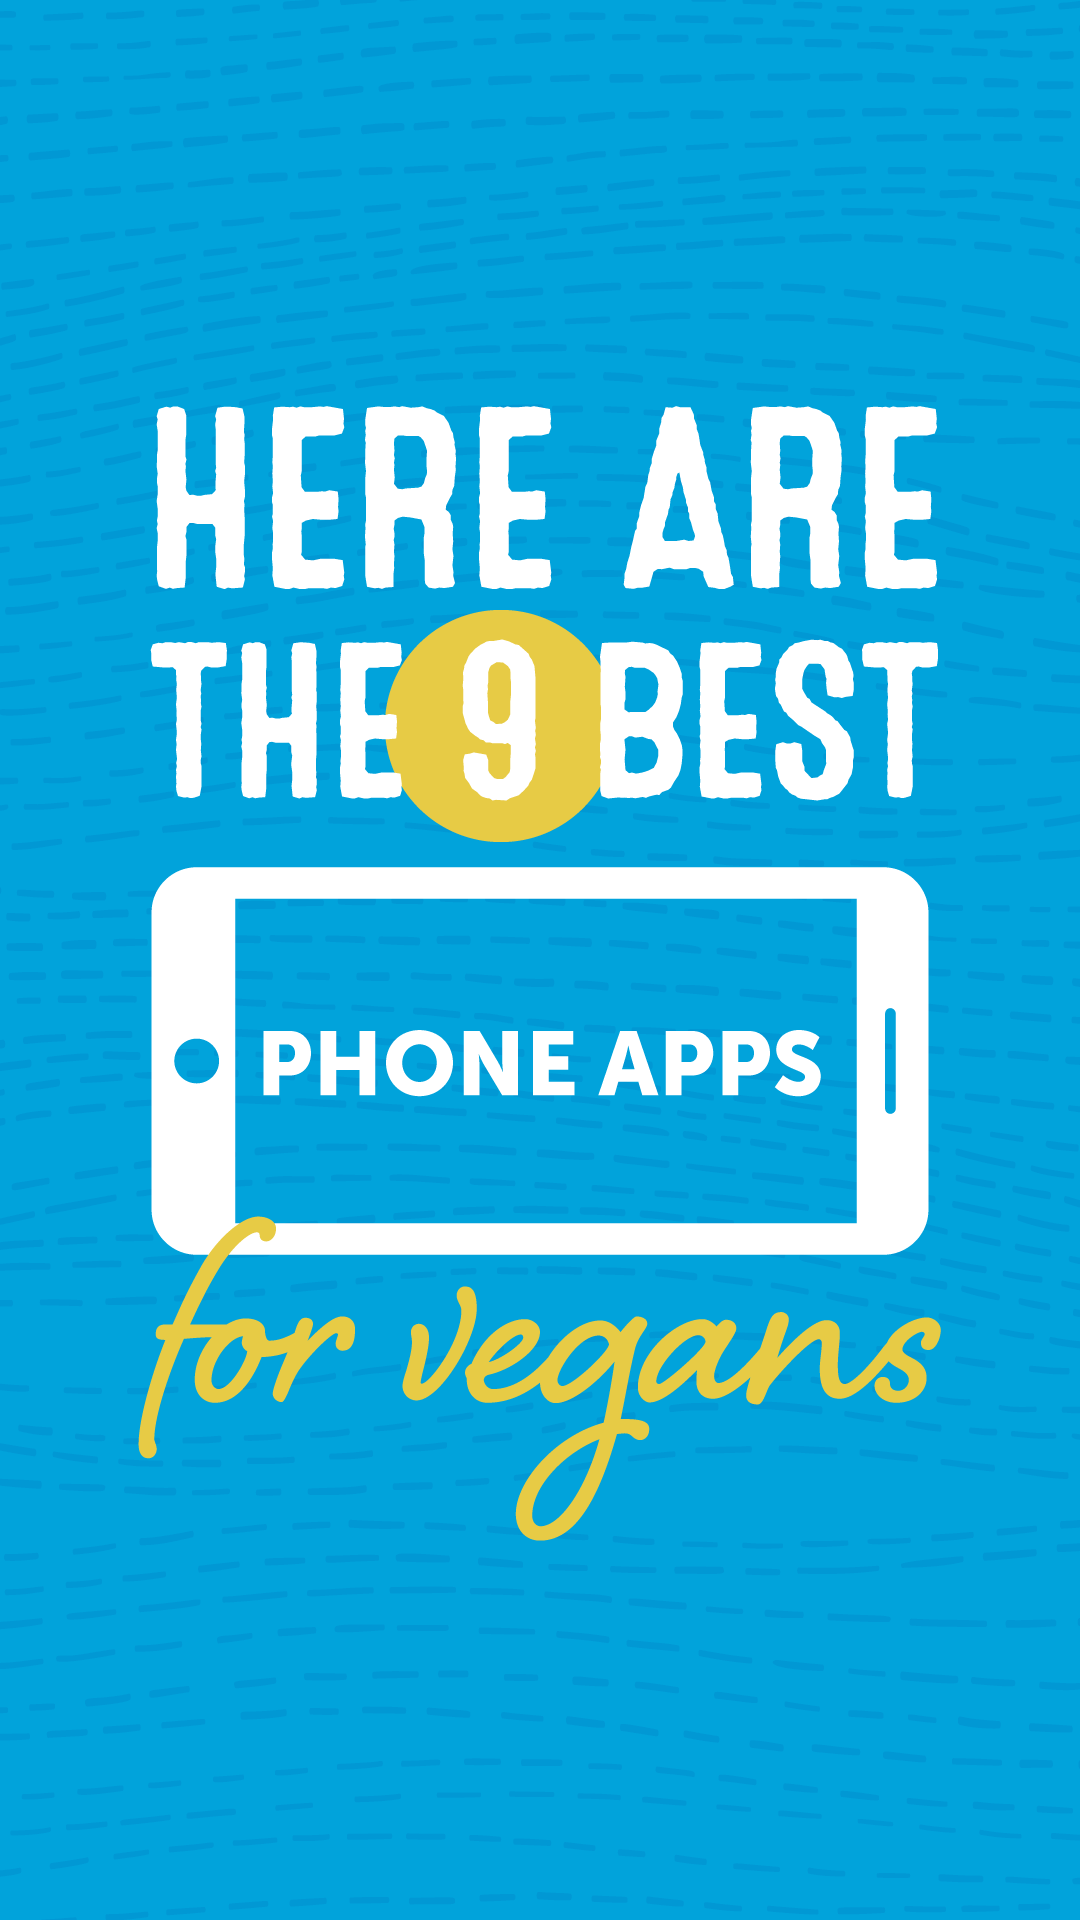 Here Are the 9 Best Phone Apps for Vegans